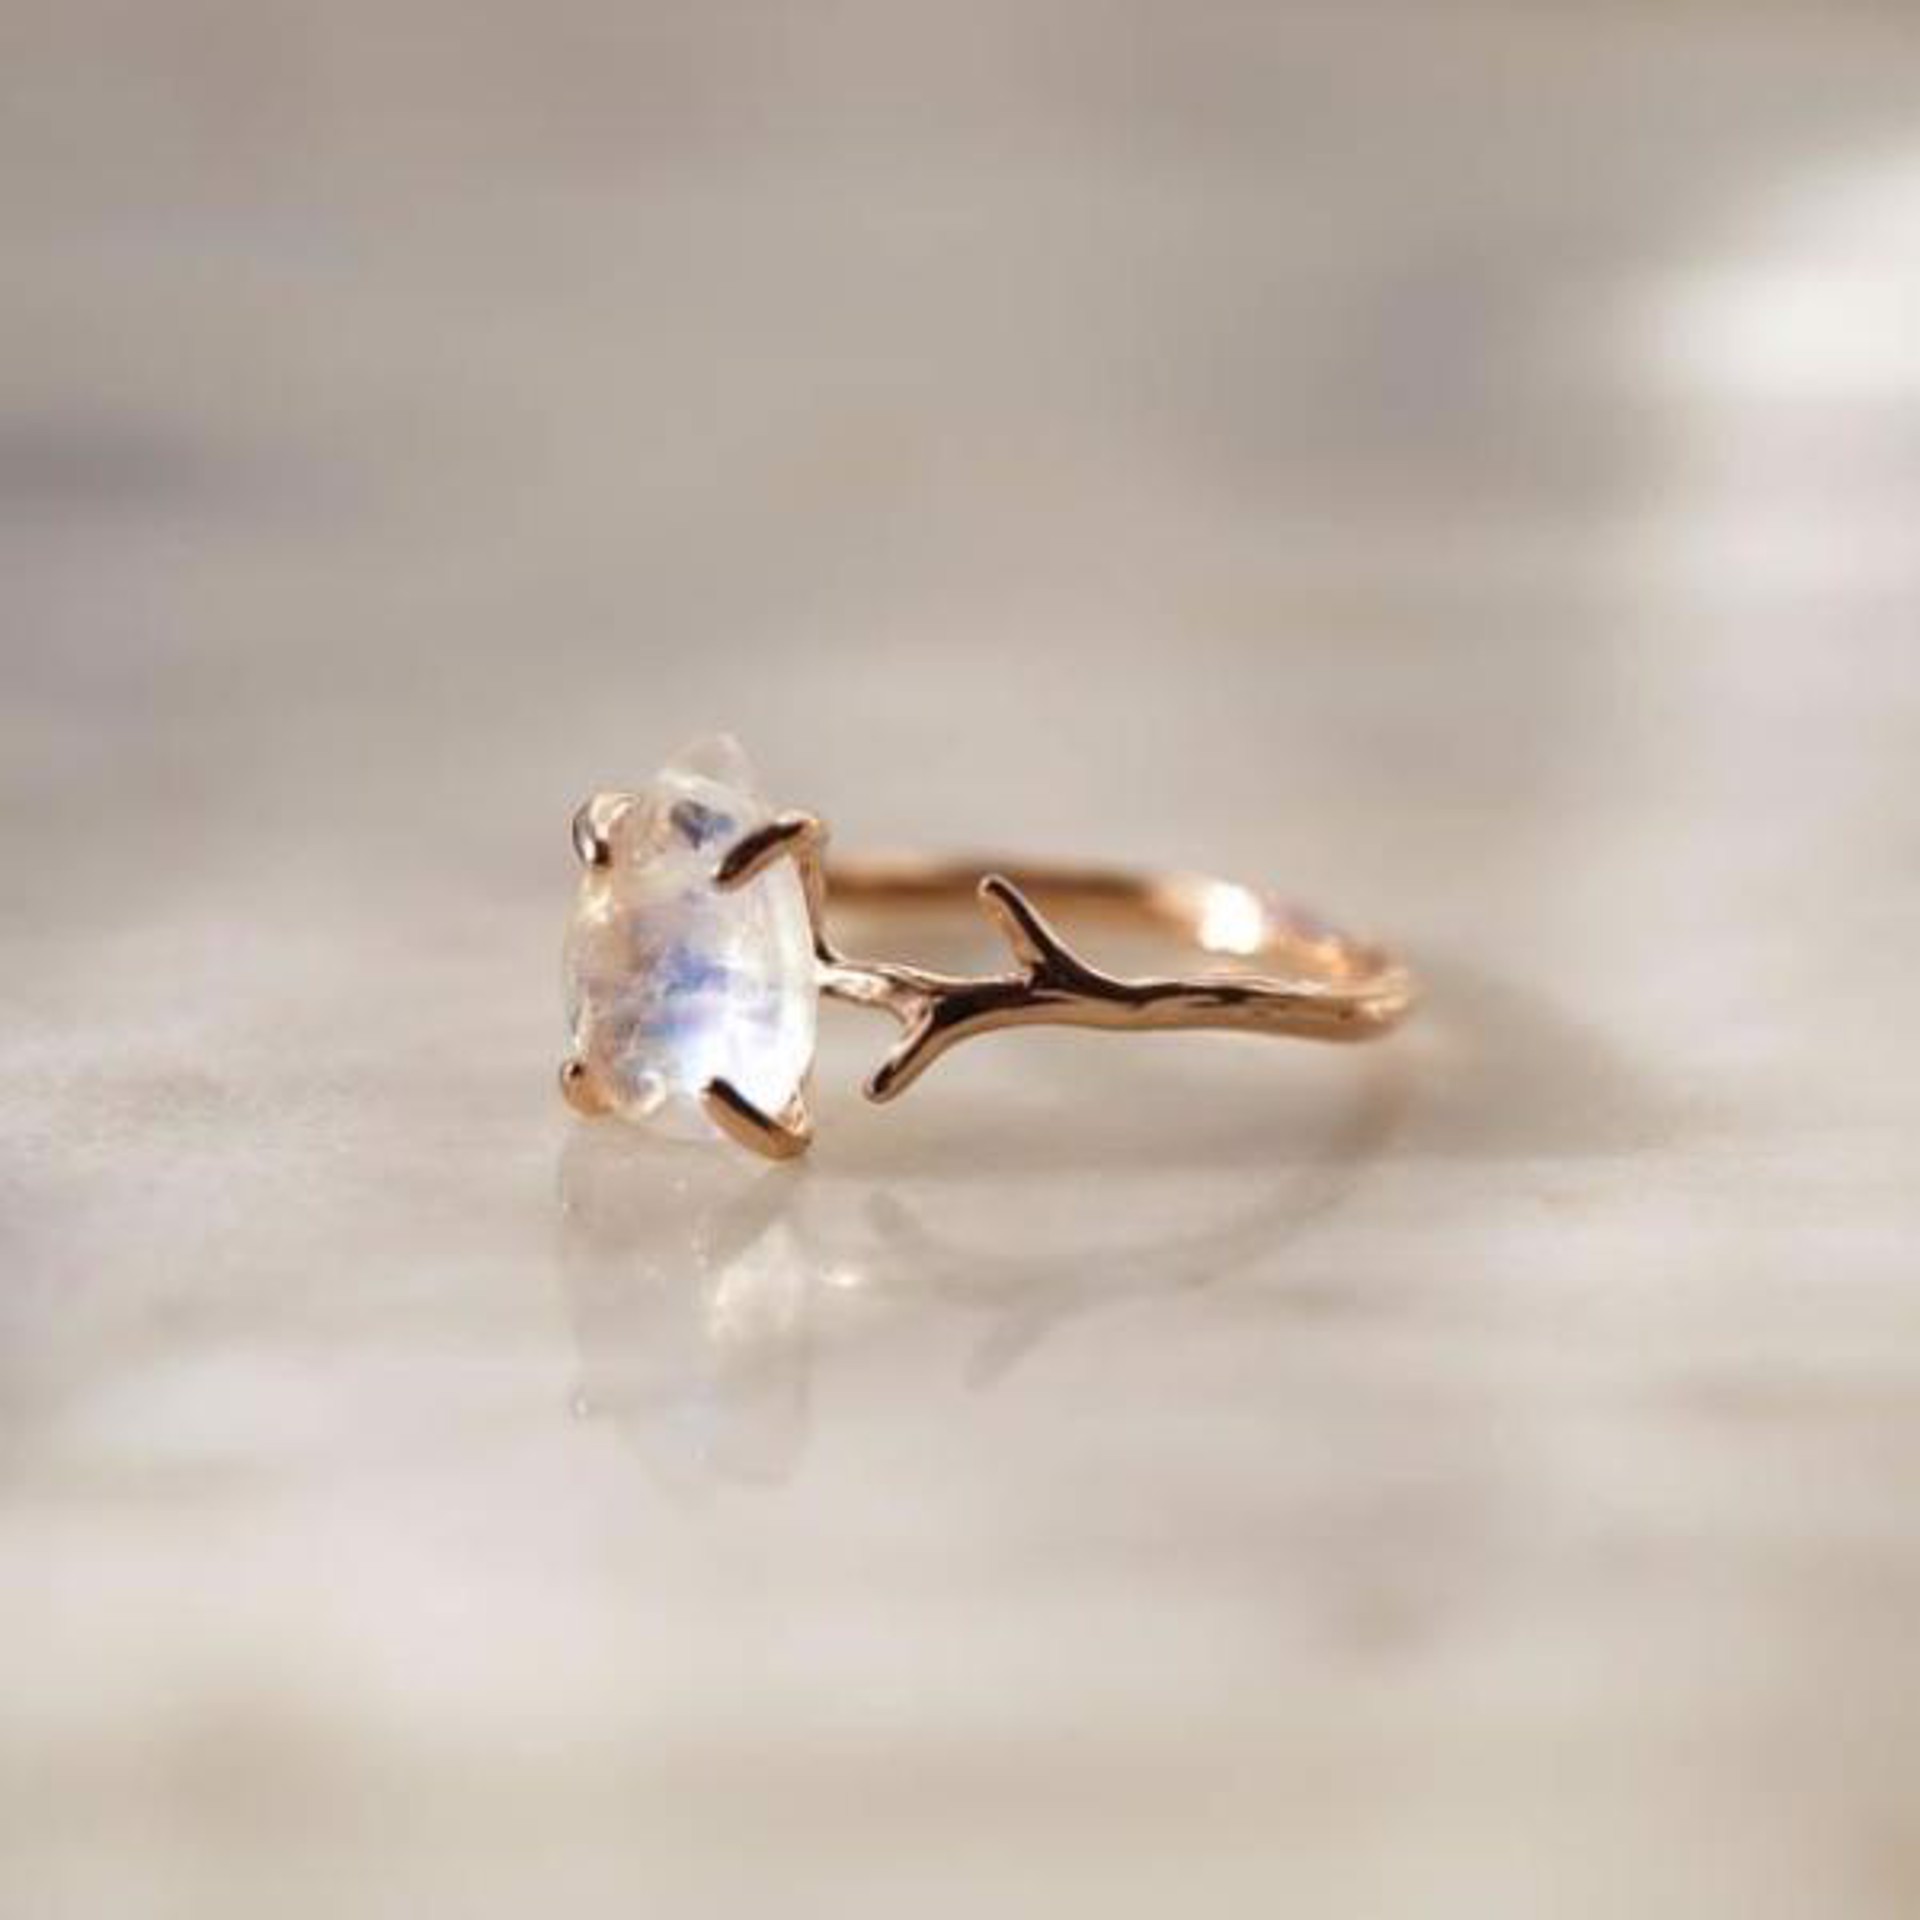 Silver Everly Ring by Wander + Lust Jewelry